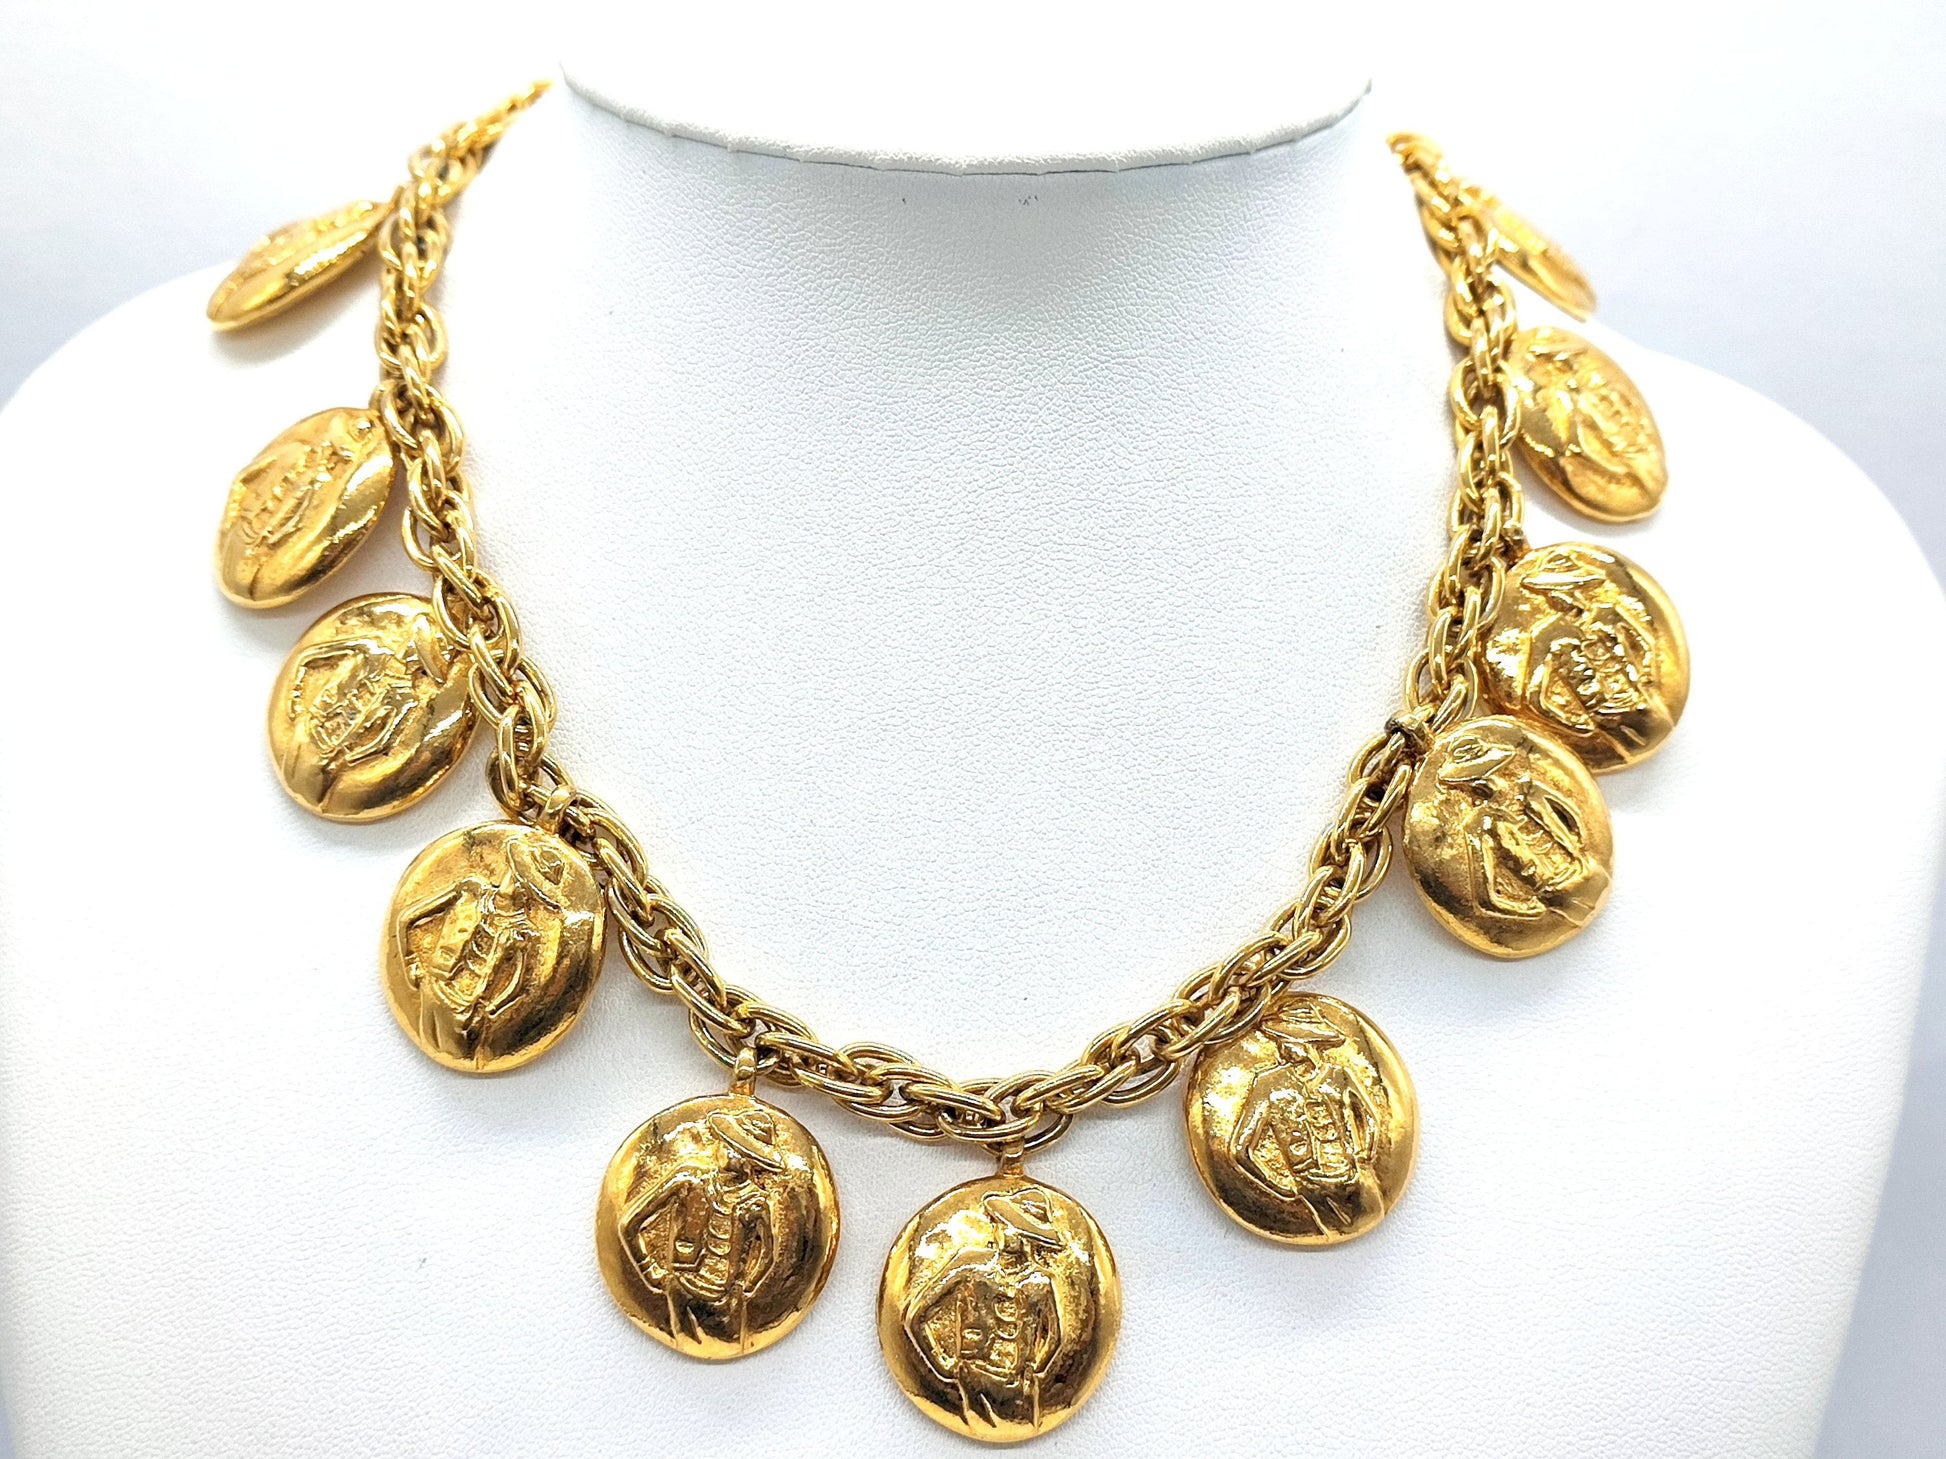 CHANEL VINTAGE 100% Authentic Genuine Coco Girl Charm Double-sided Necklace in Gold Plated, 1990's, Great Condition, Grade AB